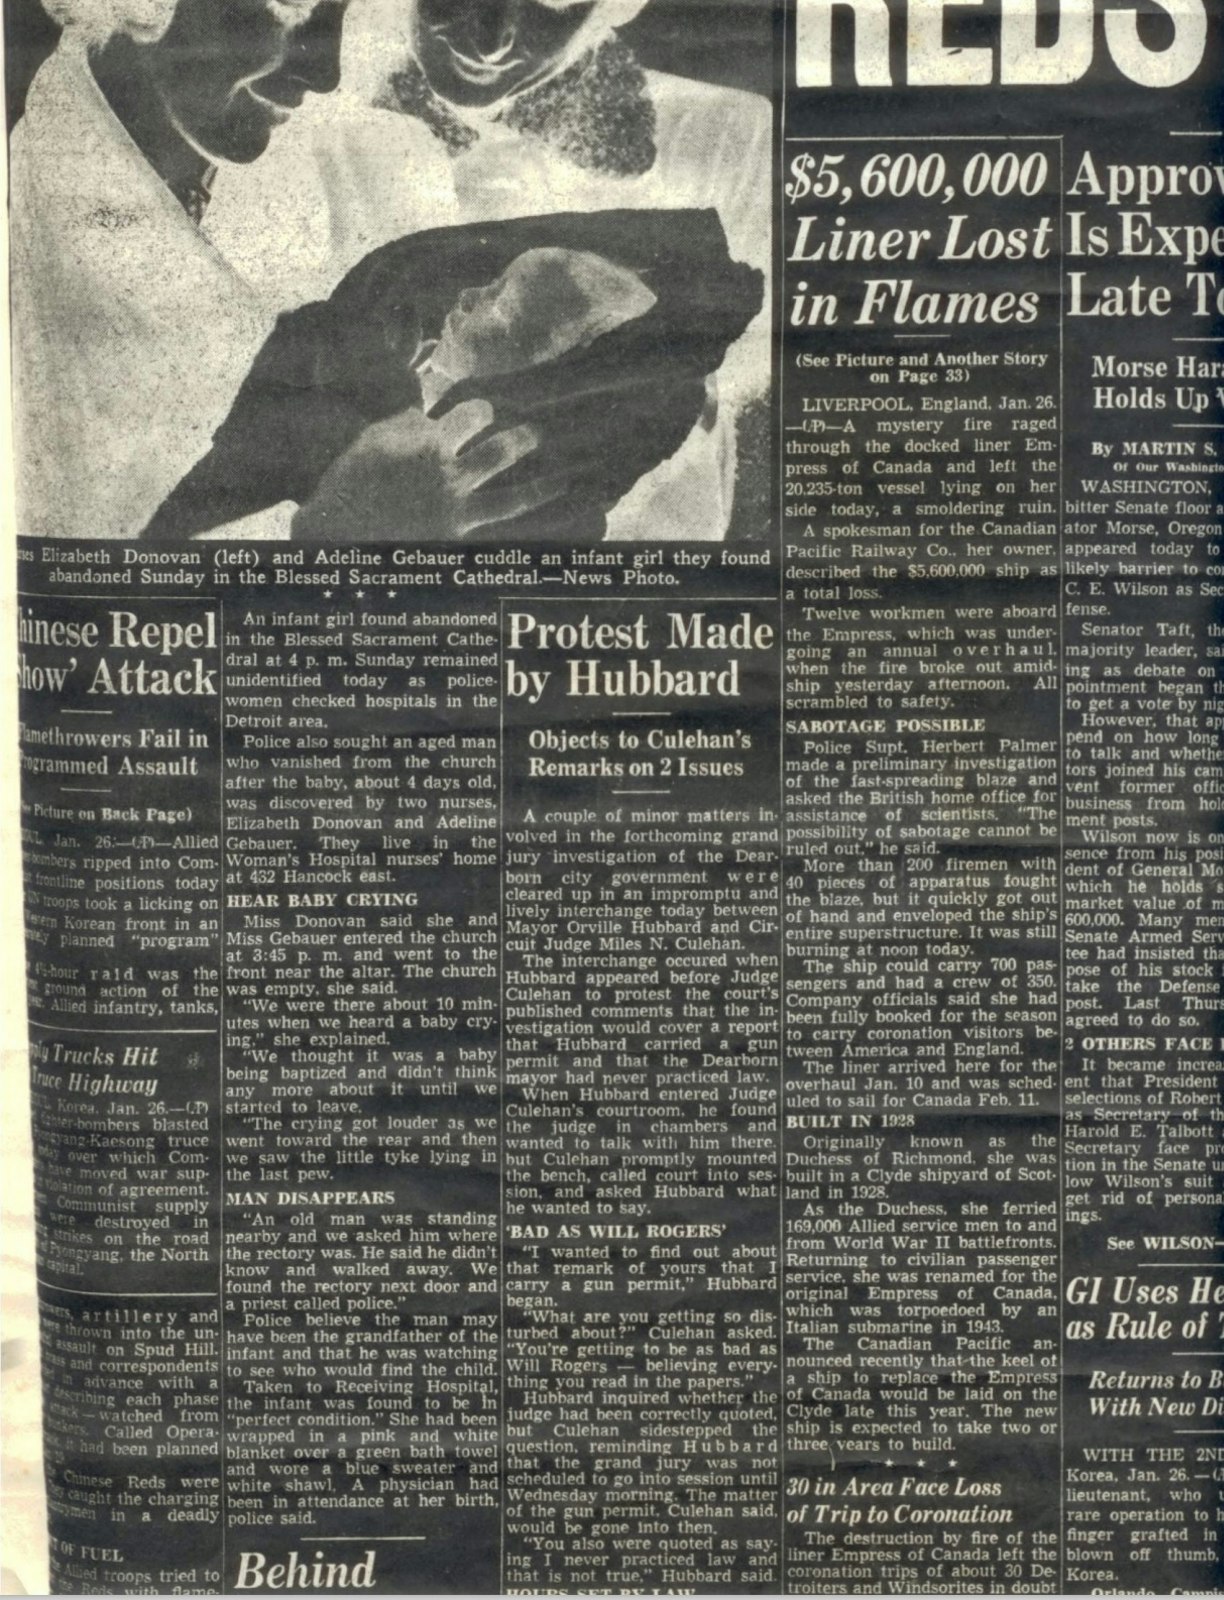 The Jan. 27, 1953 edition of the Detroit News details how Fuller was found as an abandoned infant in the back pew of the Cathedral of the Most Blessed Sacrament by two nursing students. The article mentions a mysterious man who was spotted on the cathedral grounds, but no one knew about him or his connection to Fuller. (courtesy Cathedral the Most Blessed Sacrament)